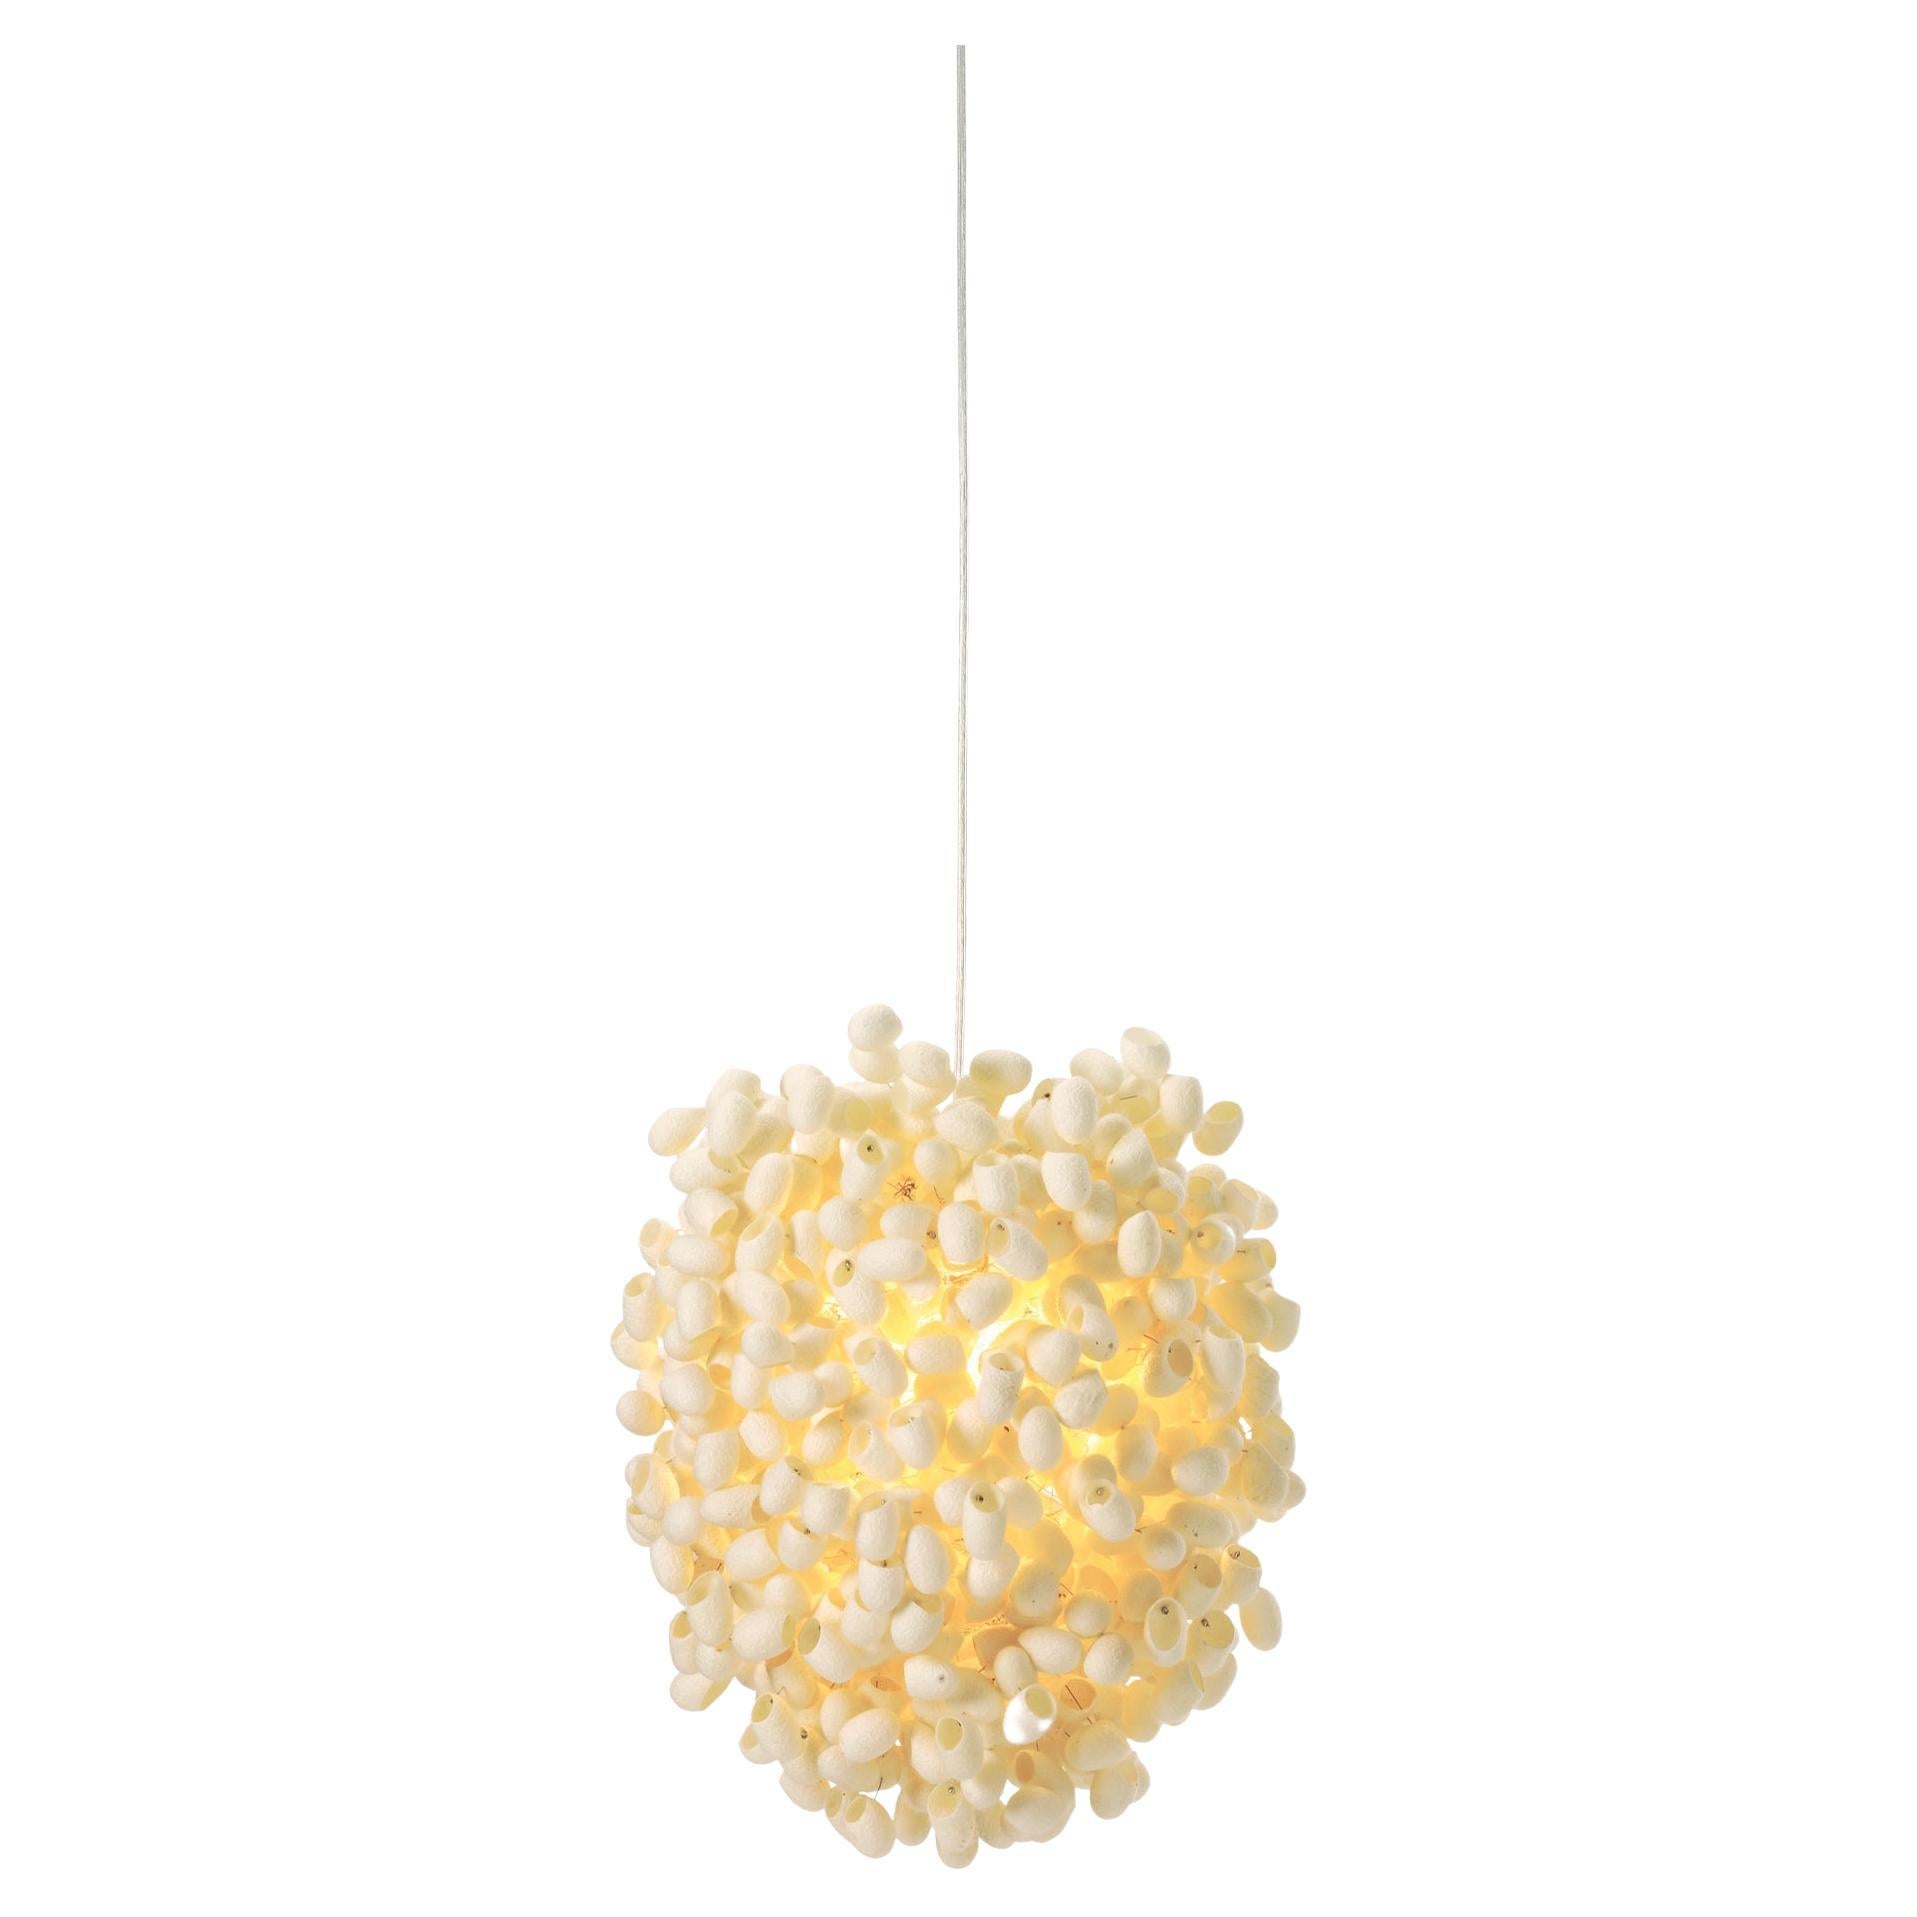 Cascadence Ceiling Light by Ango, Silk Cocoon Hand-Crafted Pendant Light